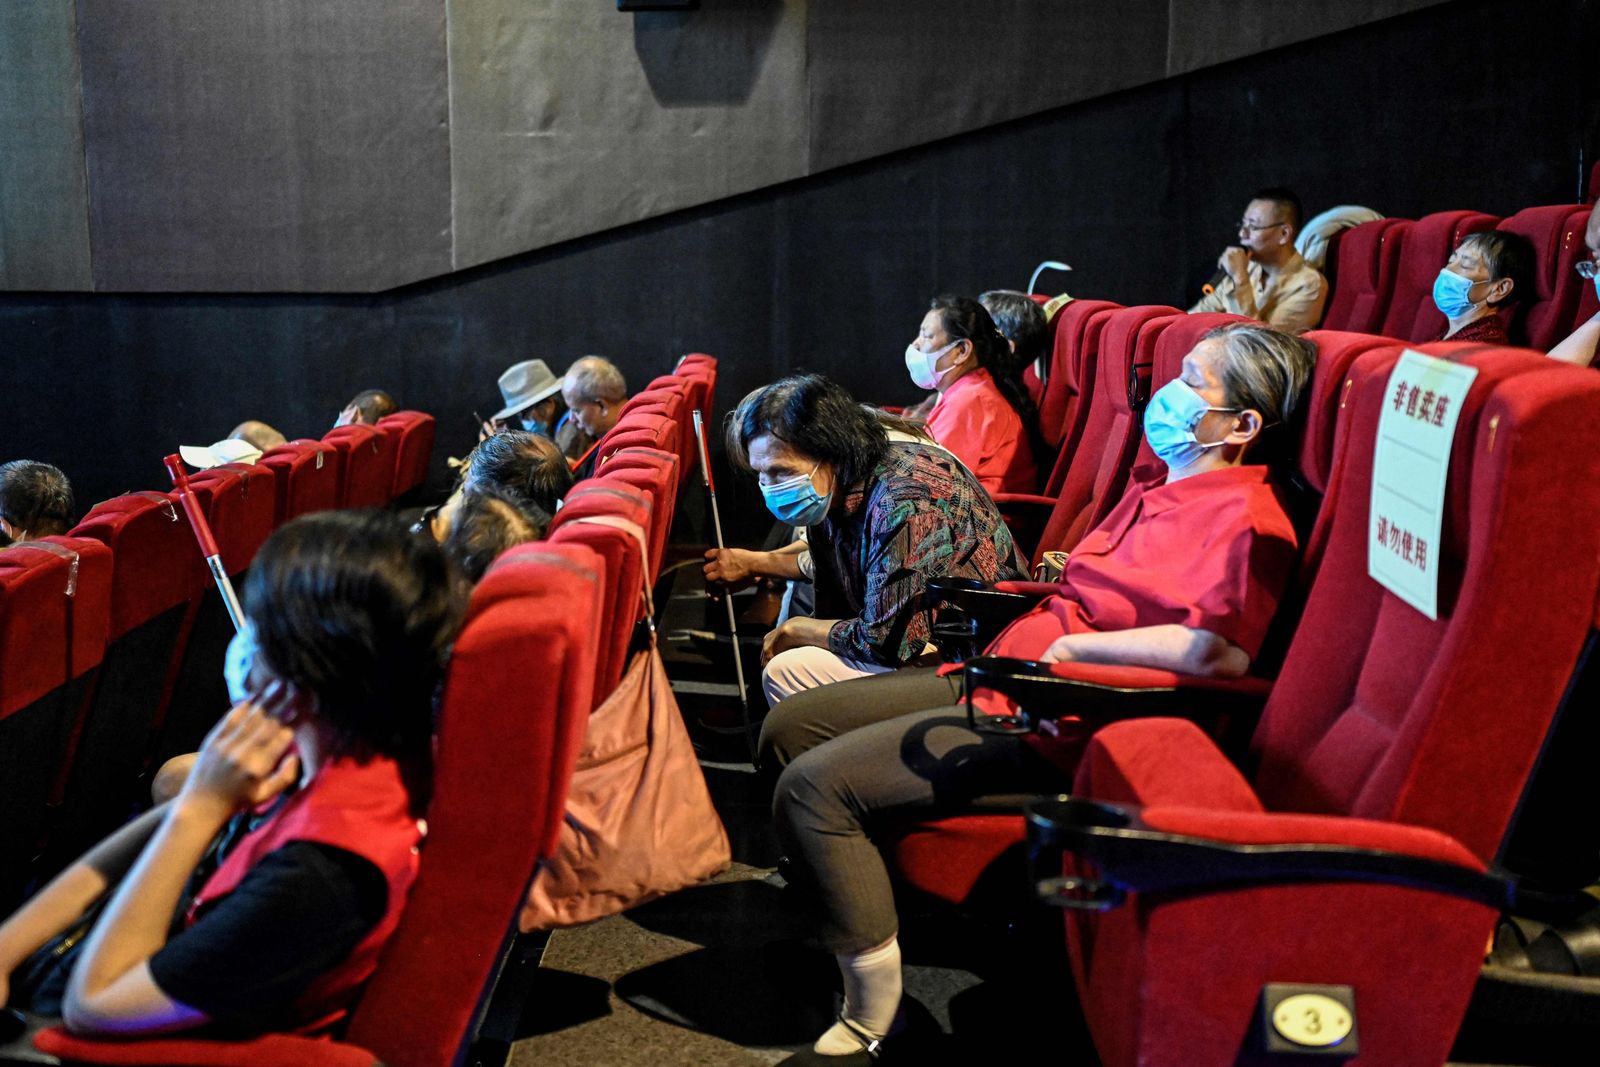 This photo taken on August 7, 2021 shows visually impaired people listening to the film narrator during a screening at a cinema in Beijing. - Dozens of blind moviegoers come to the Saturday screenings organised by Xin Mu Theater, a small group of volunteers who were the first to introduce films to blind audiences in China. (Photo by Jade GAO / AFP) / To go with AFP story China-social-disabled-film, FEATURE by Poornima WEERASEKARA and Danni ZHU - AFP